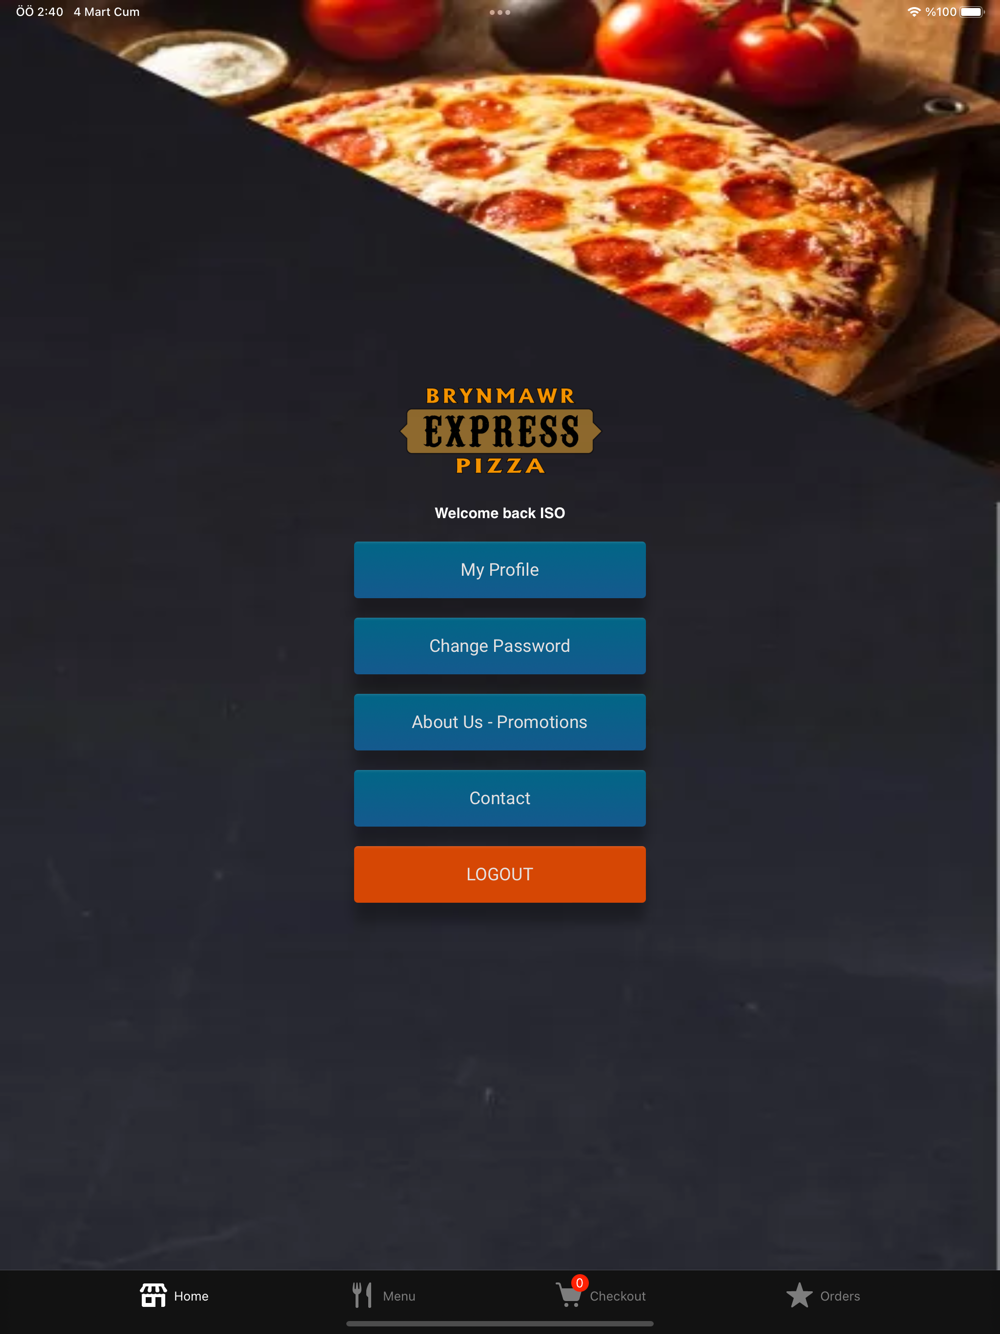 Brynmawr Express Pizza Free Download App for iPhone 